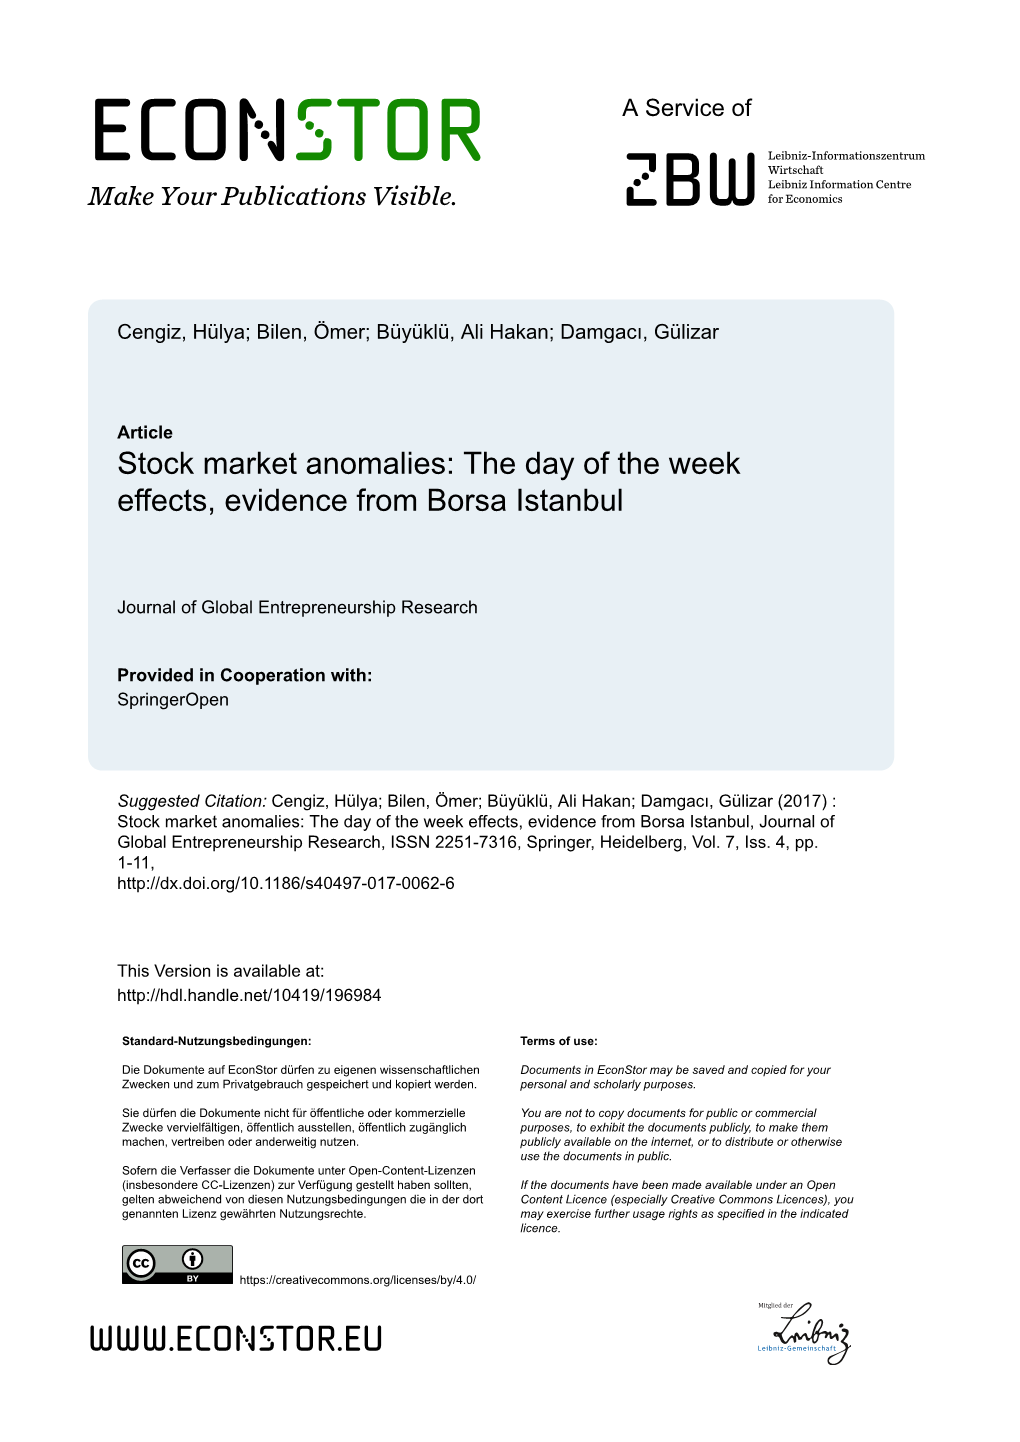 Stock Market Anomalies: the Day of the Week Effects, Evidence from Borsa Istanbul